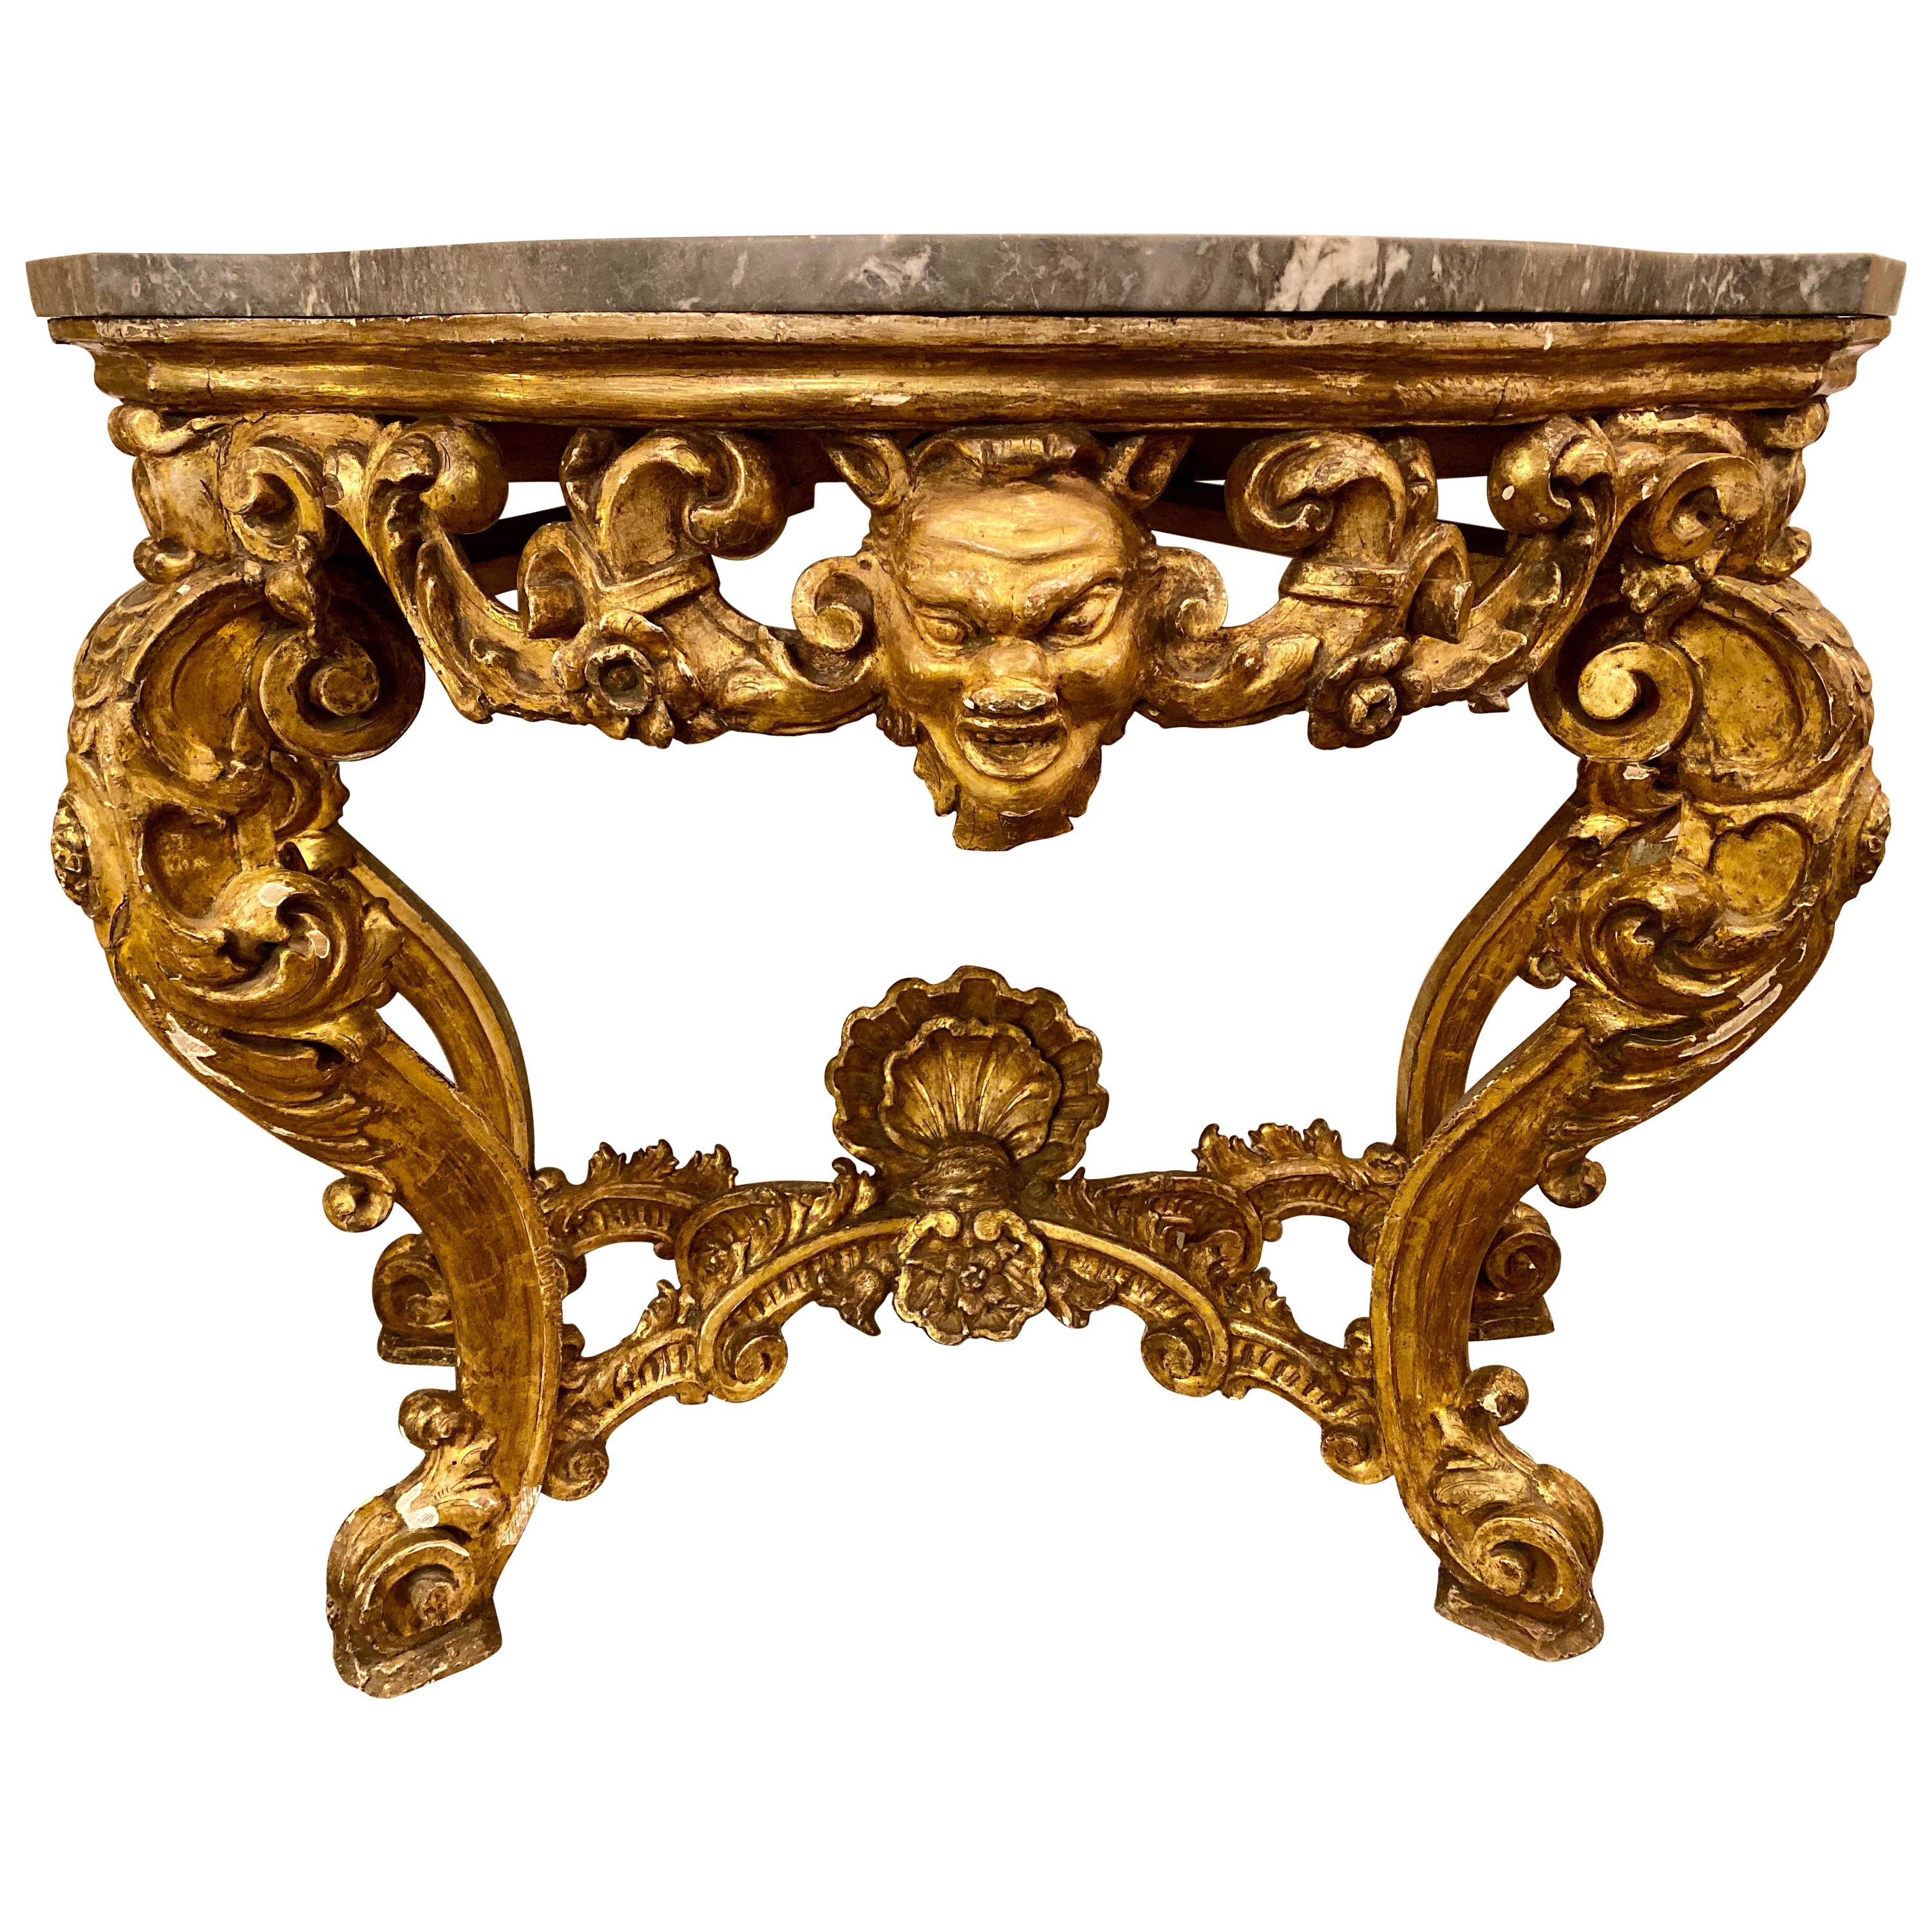 19th Century Venetian Gilt Gold Console Table, Serpentine, Ornately Carved